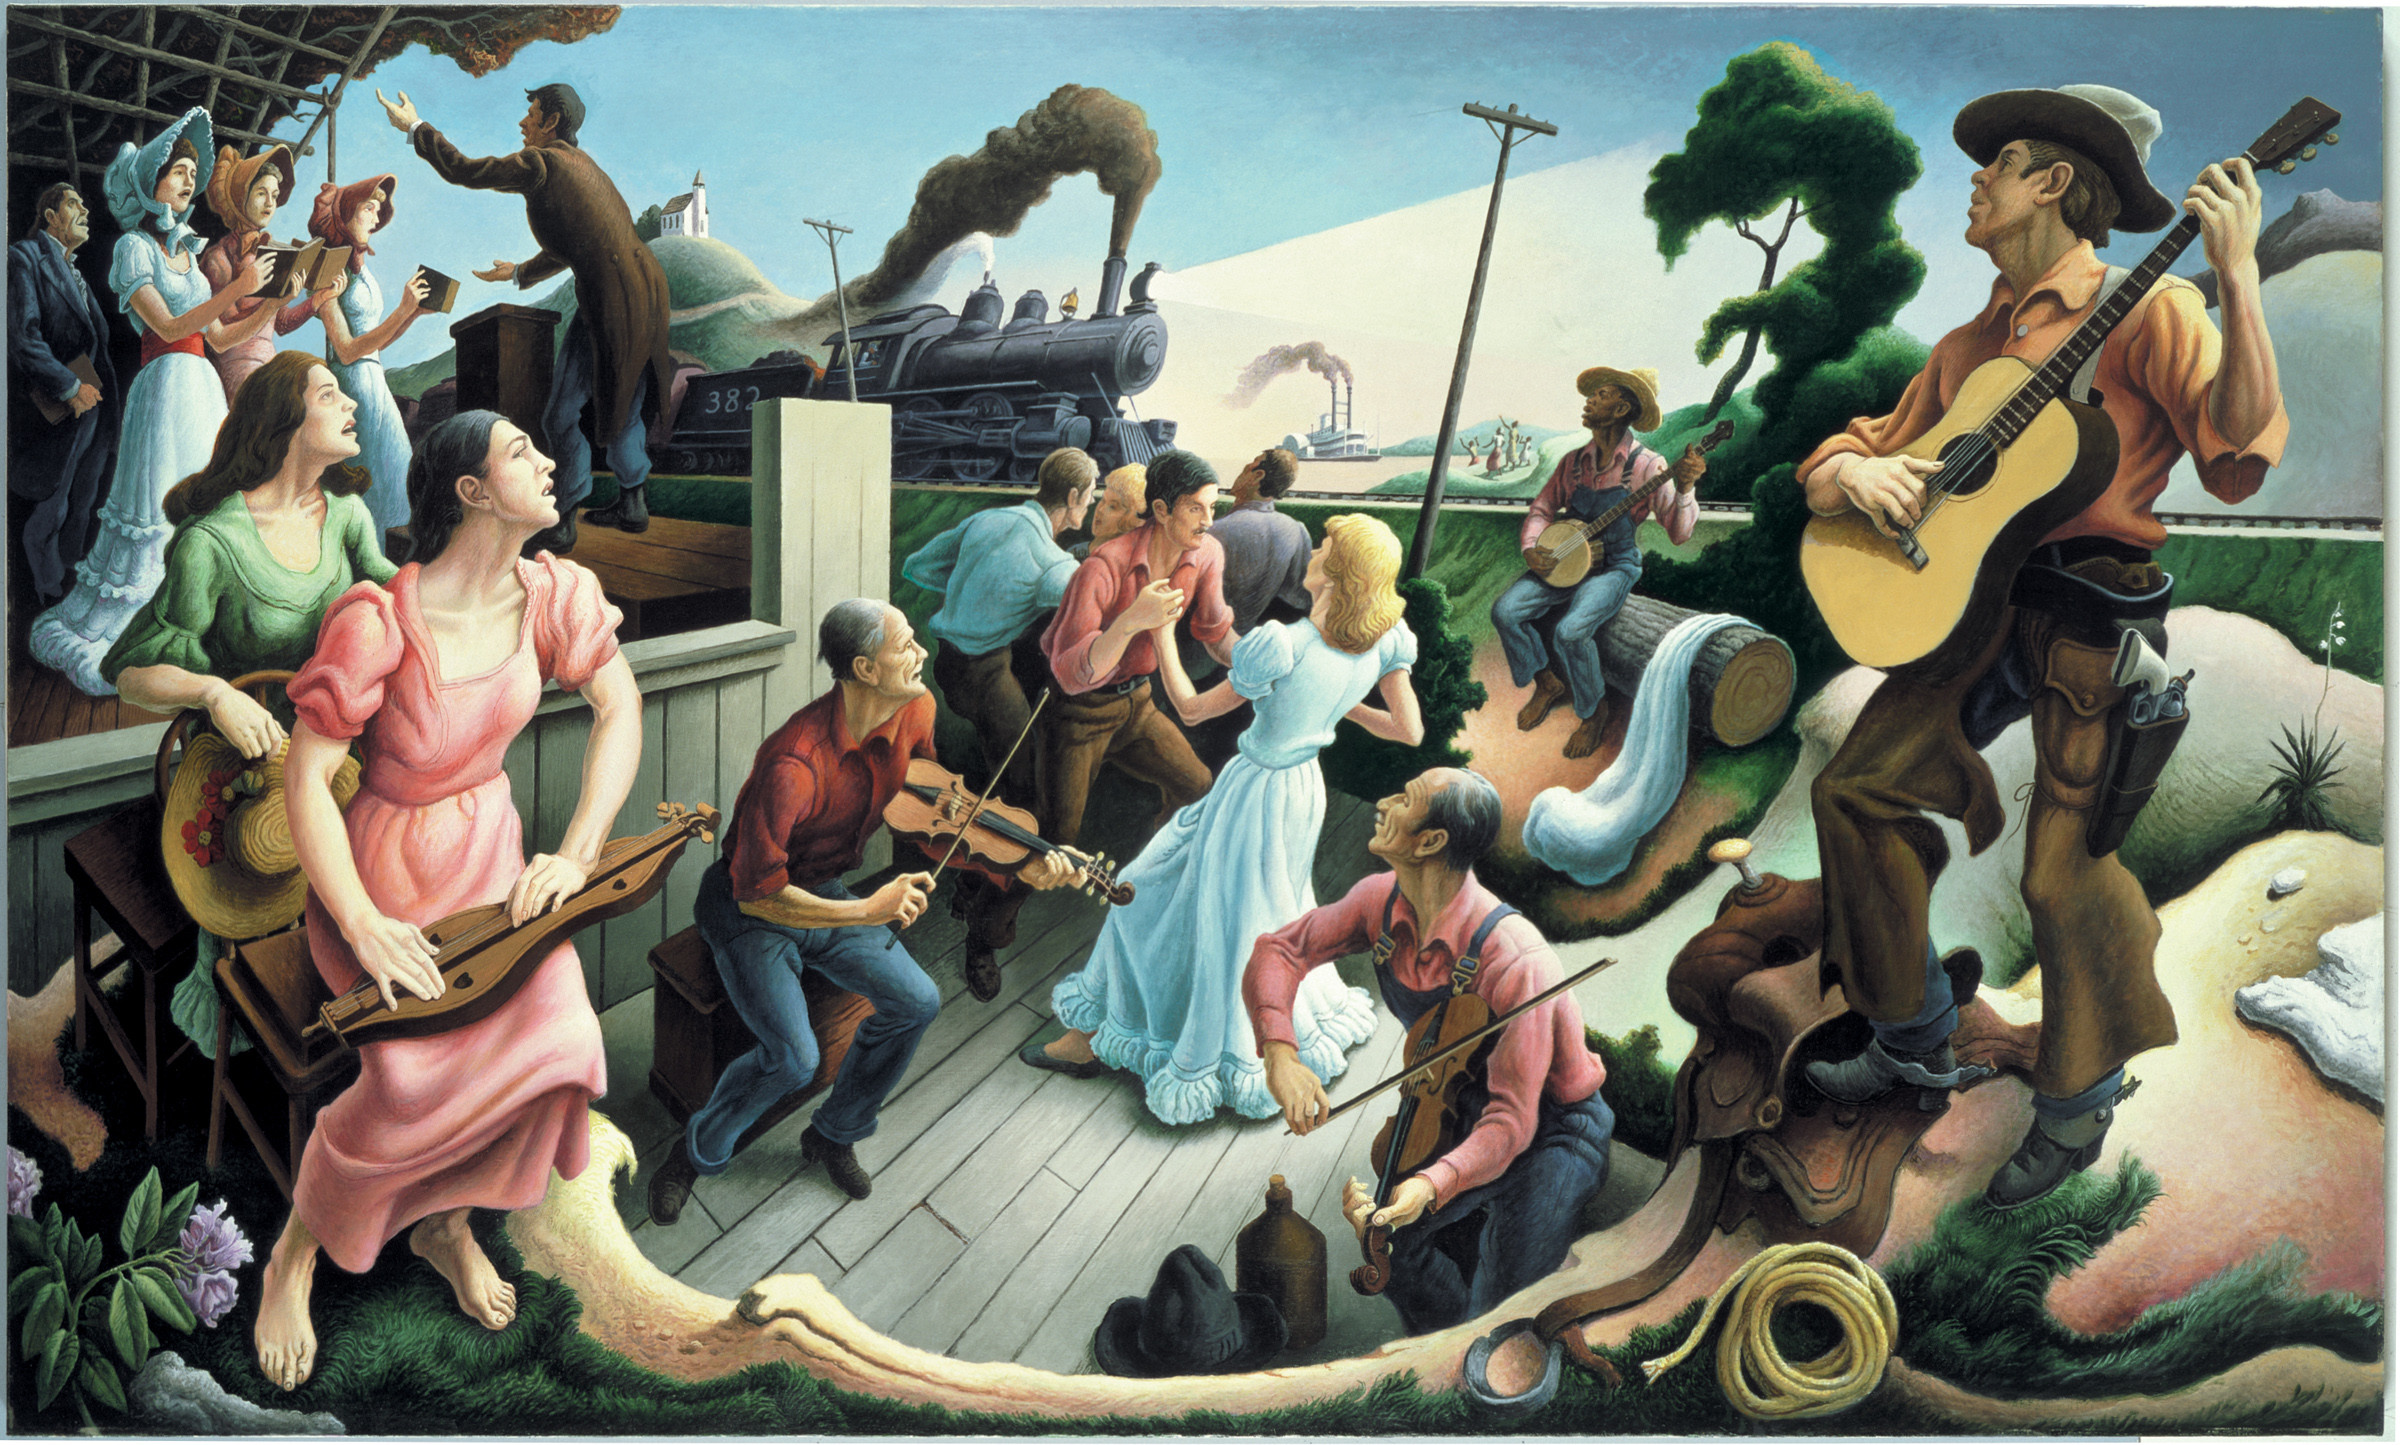 2400x1445 The Sources of Country Music,” painted by Thomas Hart Benton in 1975, just